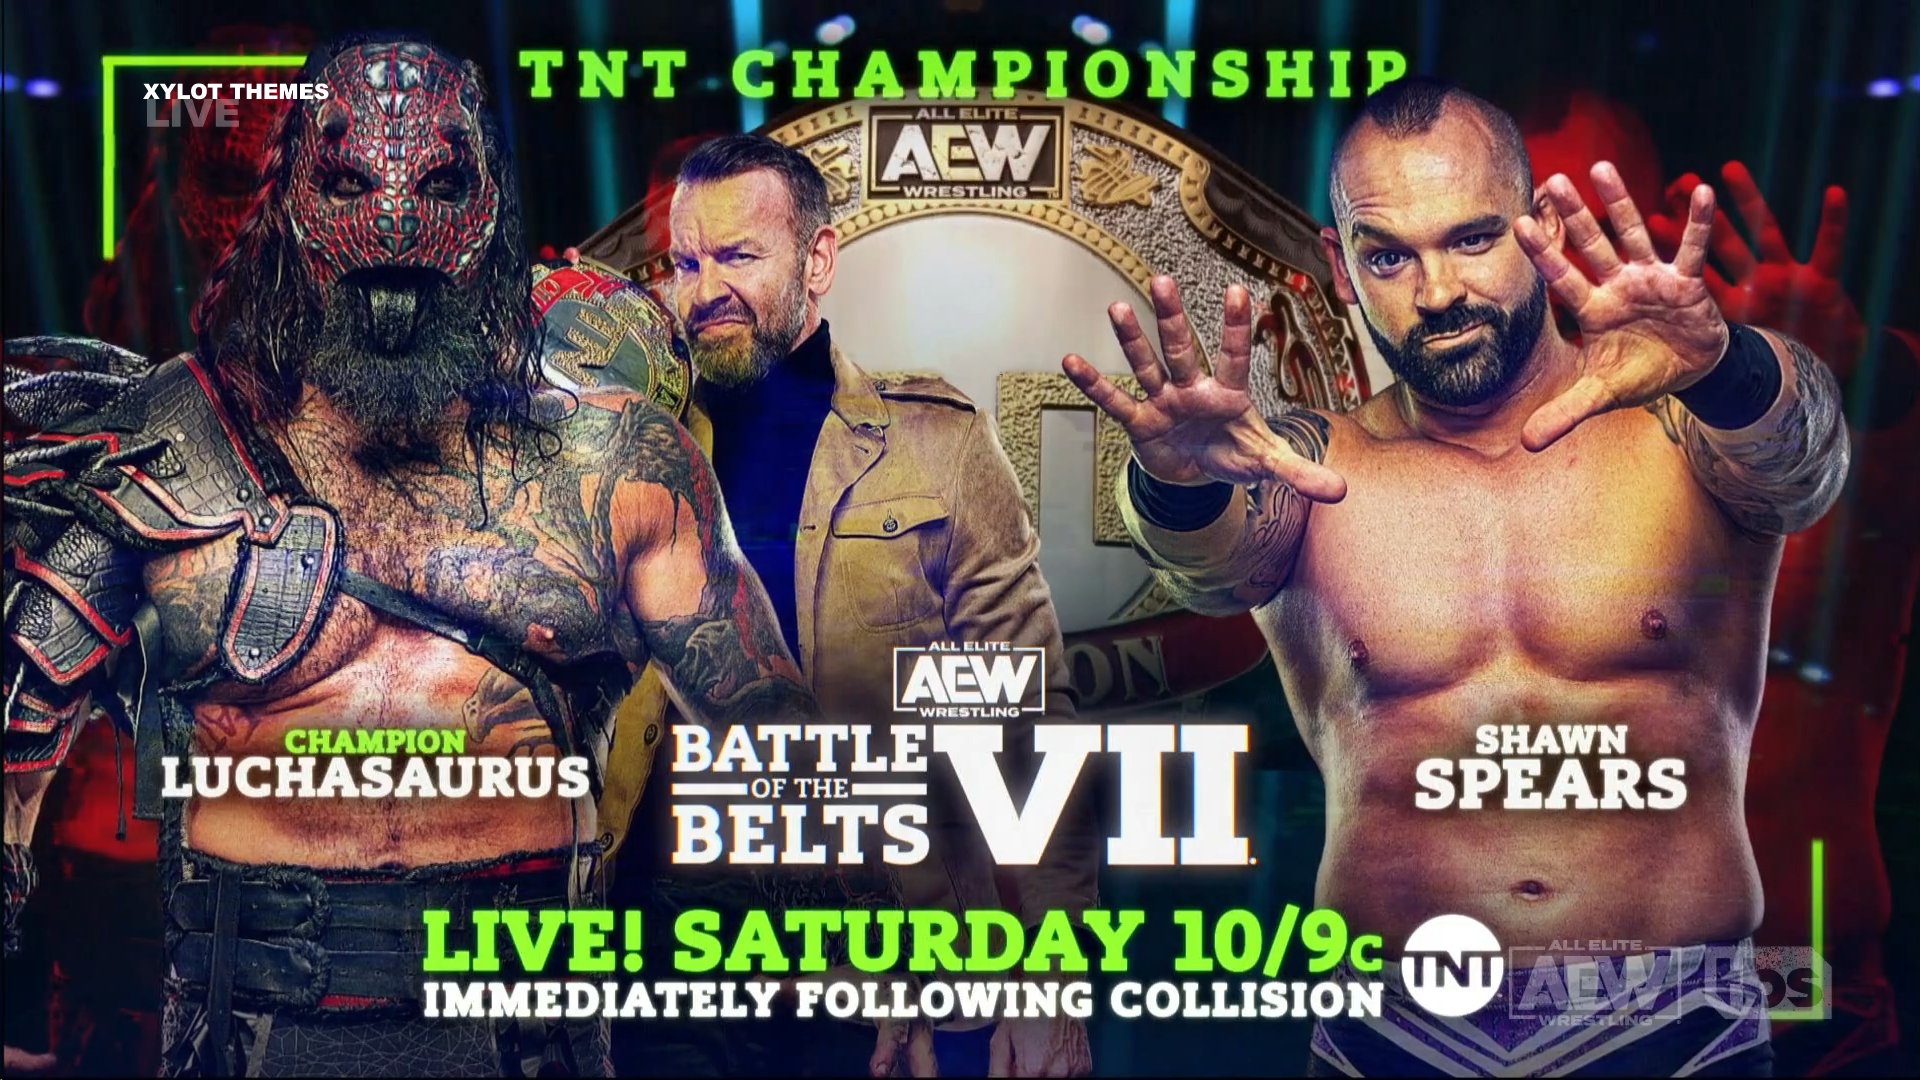 A match graphic for AEW Battle of the Belts VII.